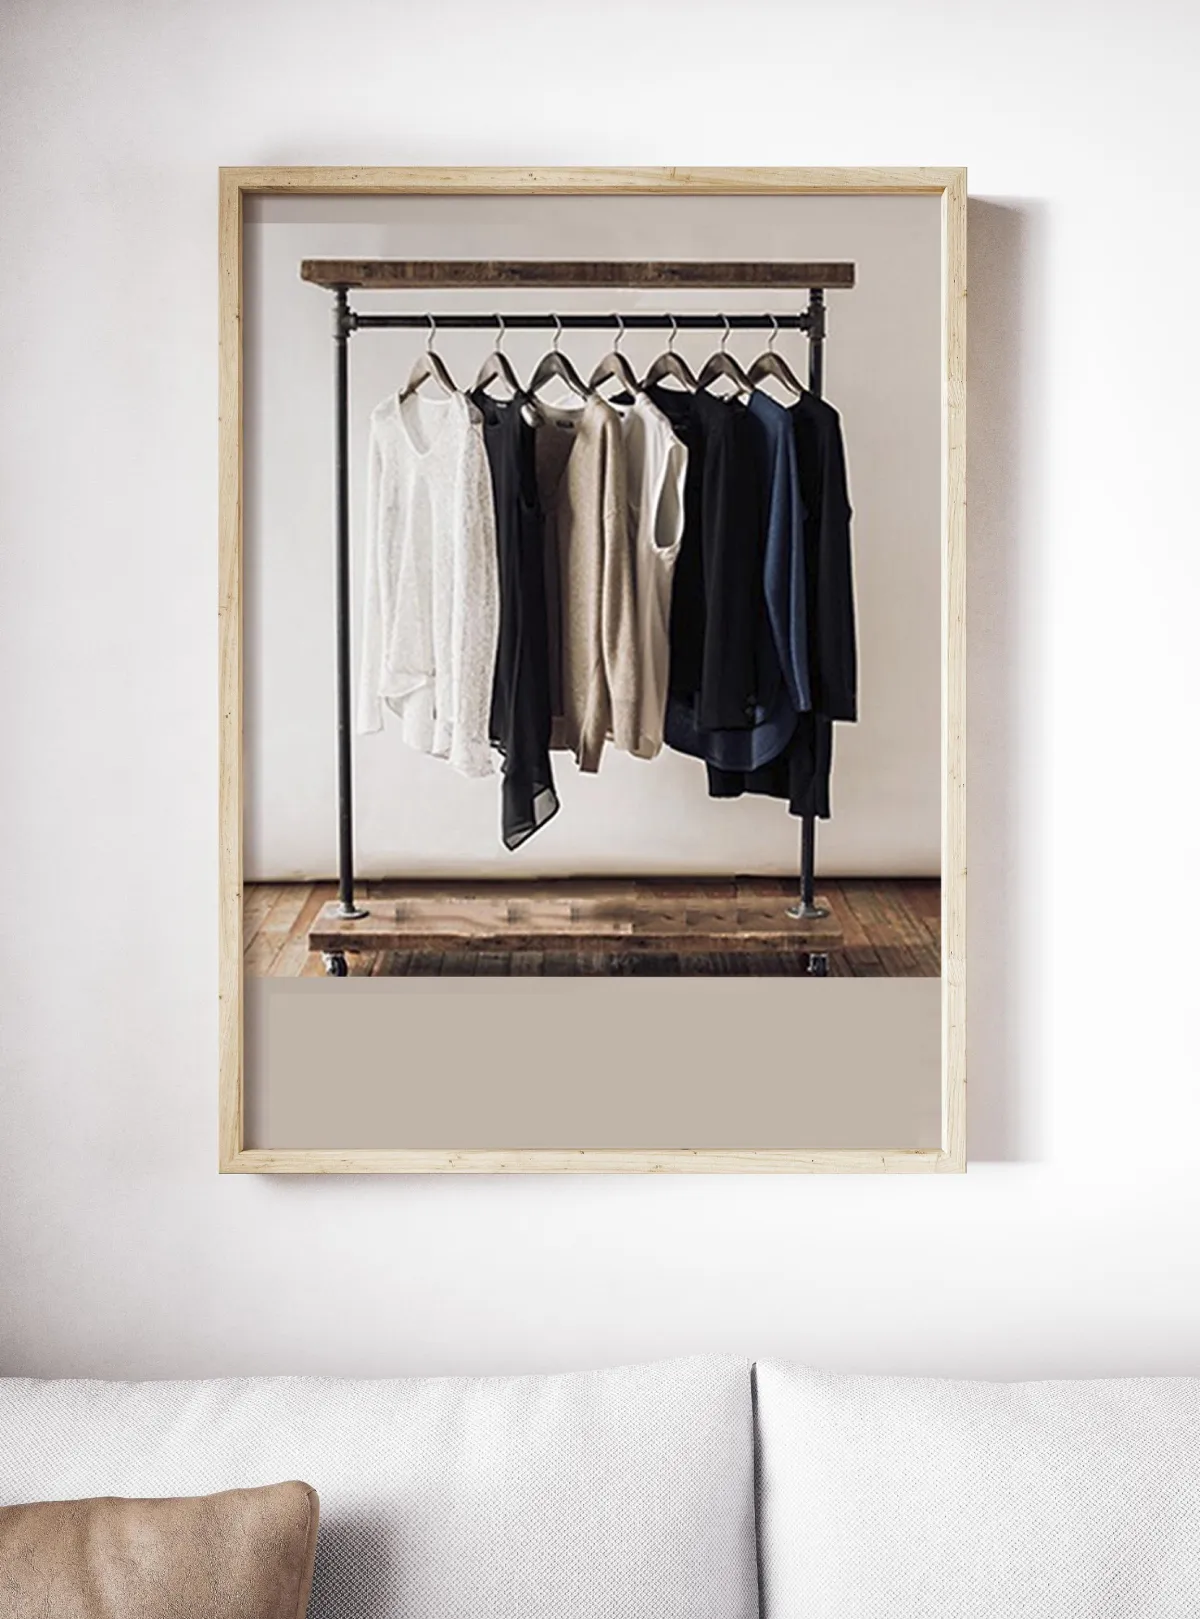 Photo of garments hanging on a ail in a wooden frame 